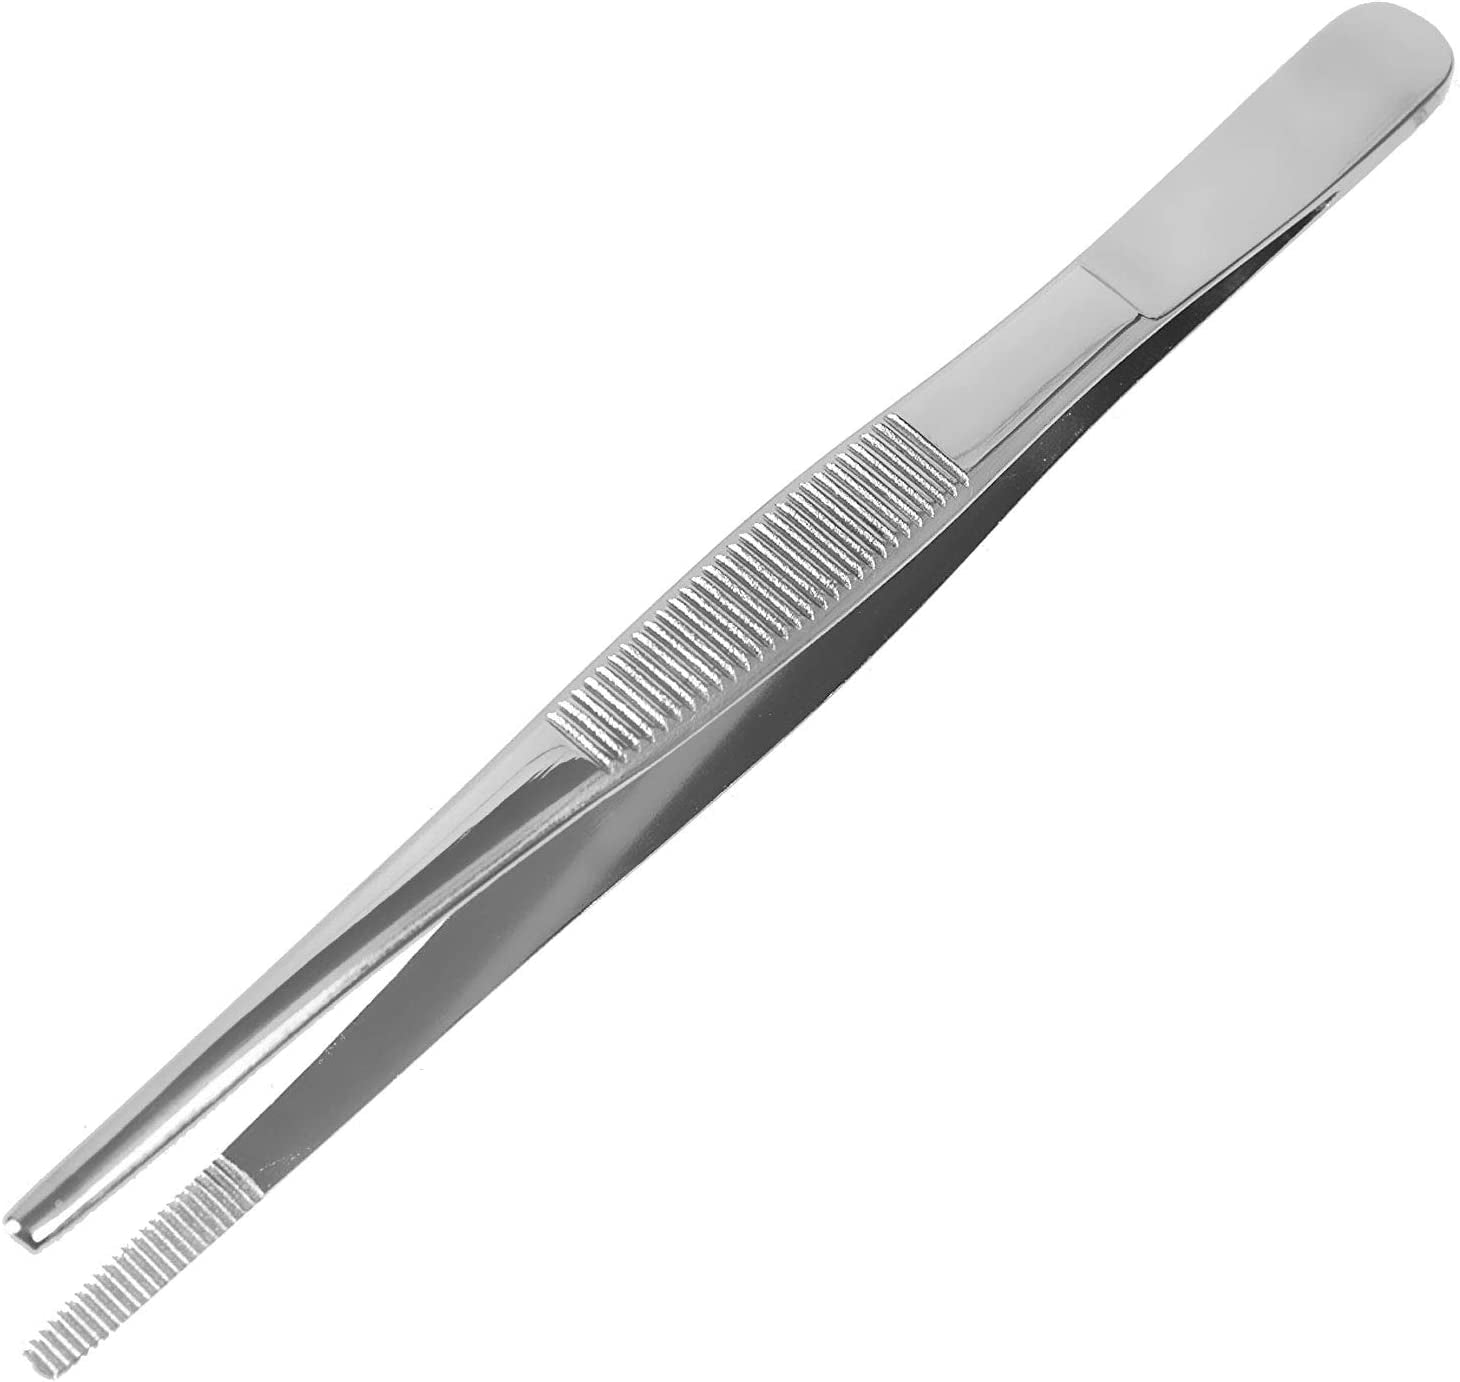 Surgical Tweezers and Dressing Forceps, 5.5 Inches Long, Serrated, Stainless Steel